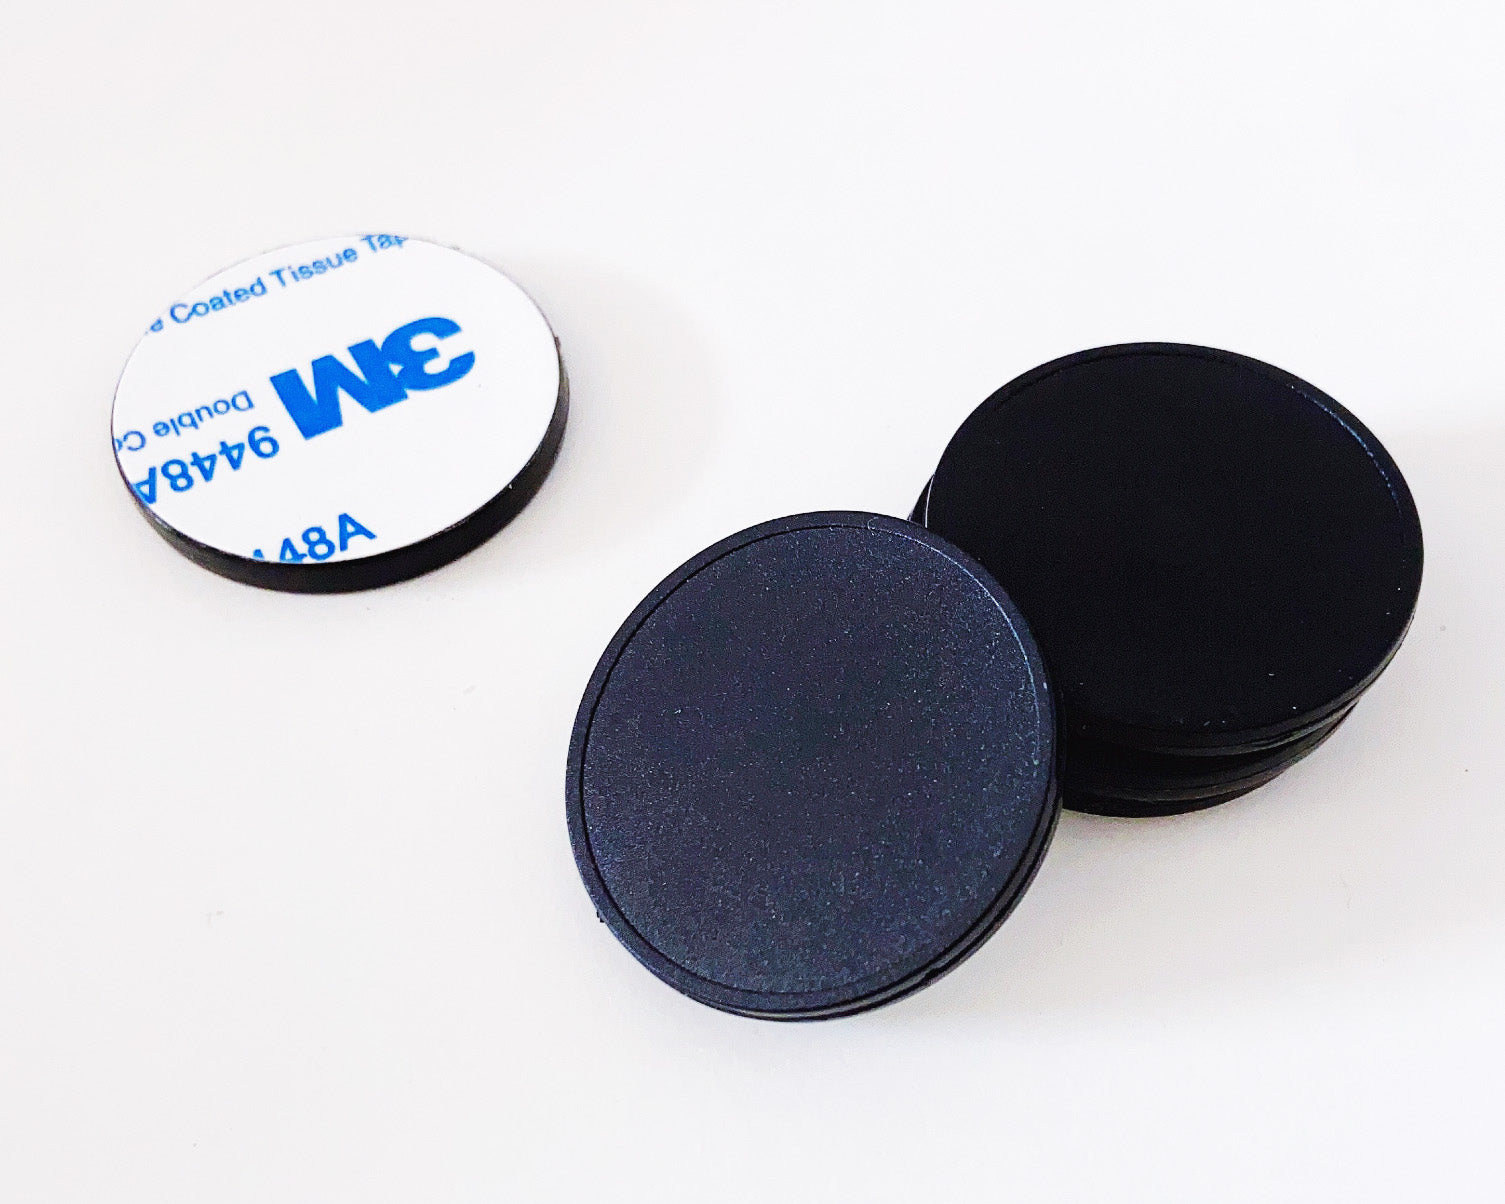 NFC Guard Tour ON-METAL rugged sticky token - Black ABS - NTAG213 - 30mm round